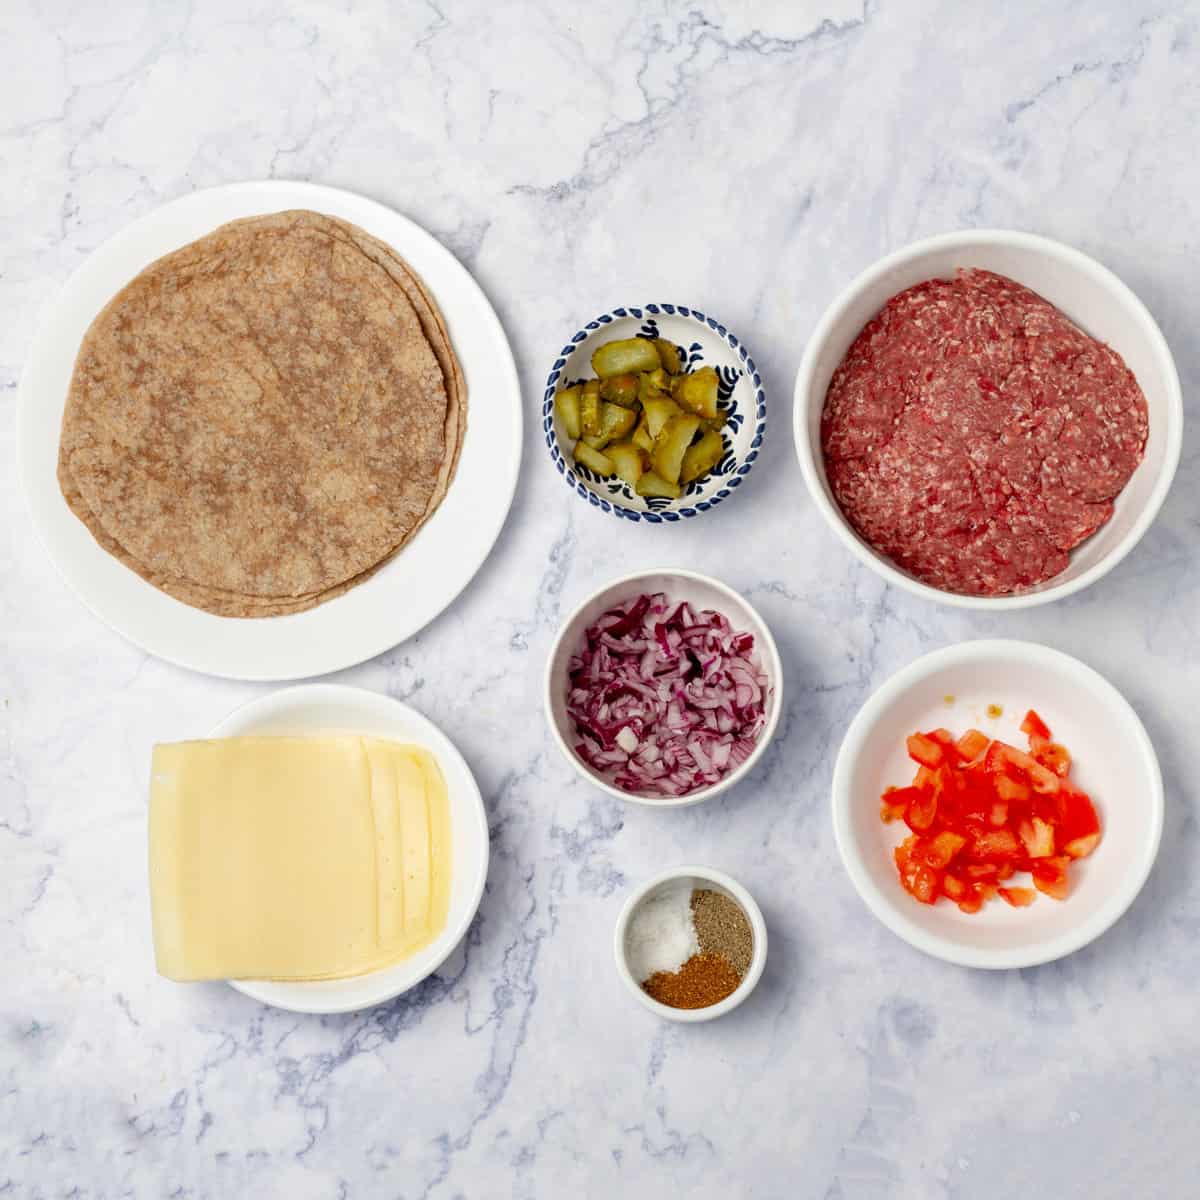 Smashed taco ingredients of tortillas, raw ground beef, peppers, onions, pickles, tomatoes, cheese, and seasonings in separate dishes.